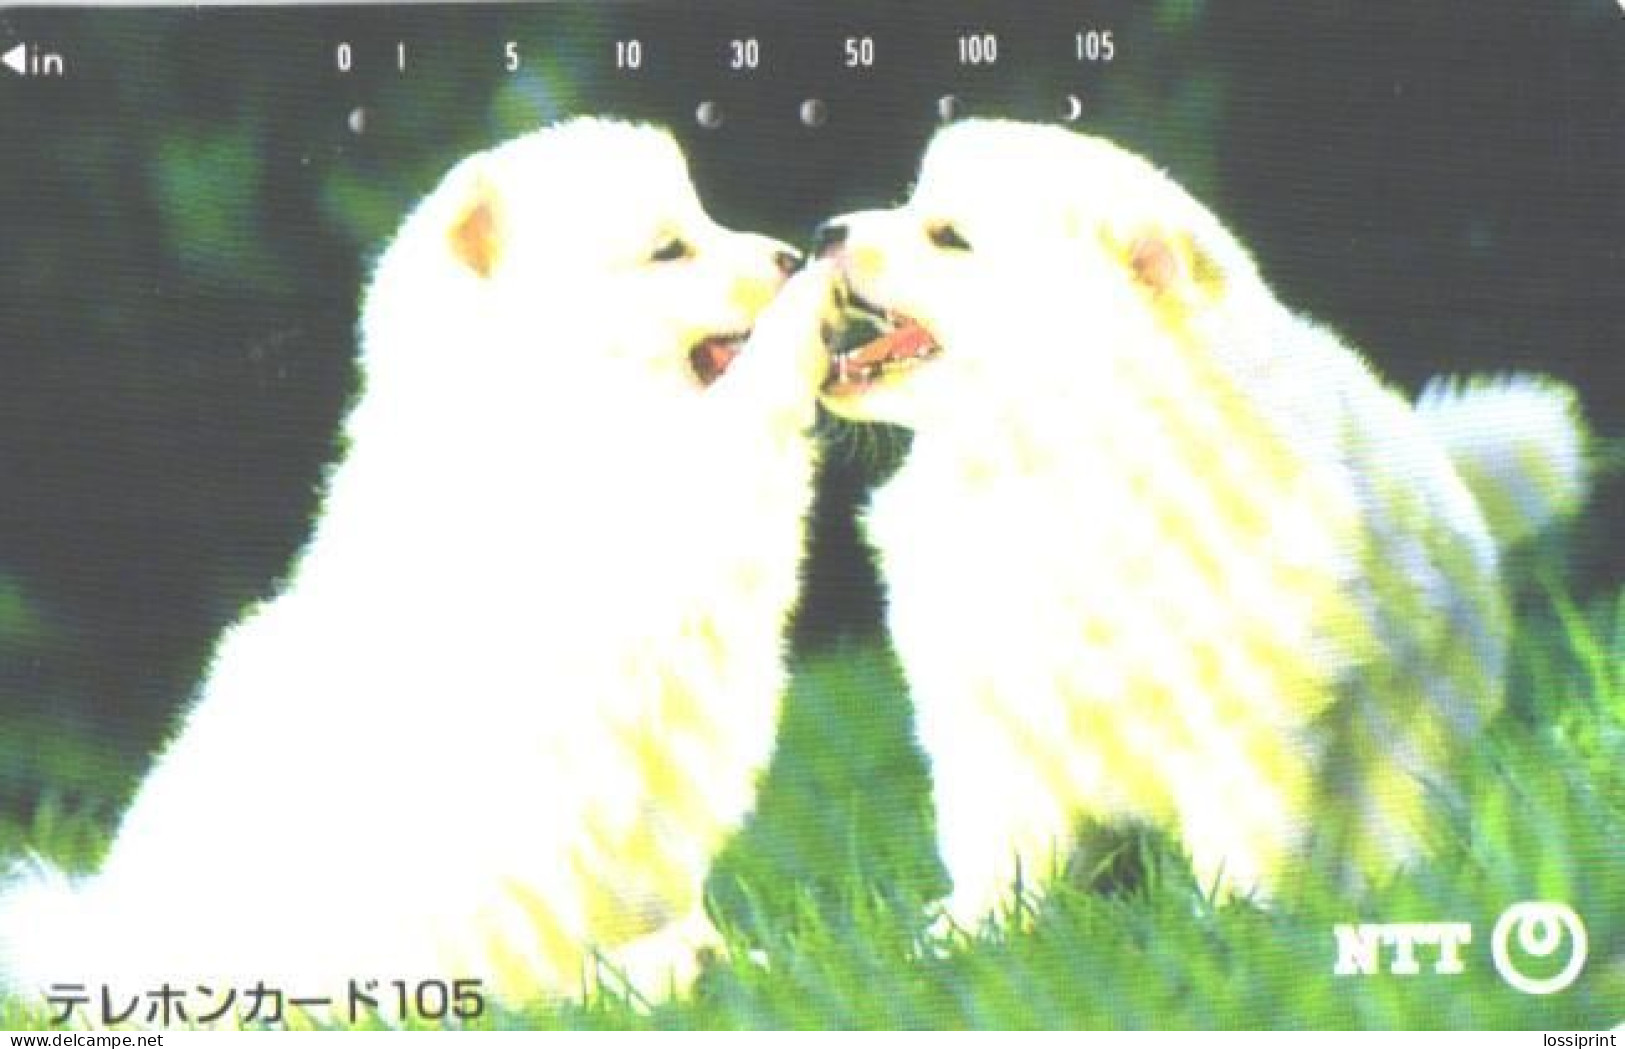 Japan:Used Phonecard, NTT, 105 Units, Dogs, Puppies - Dogs